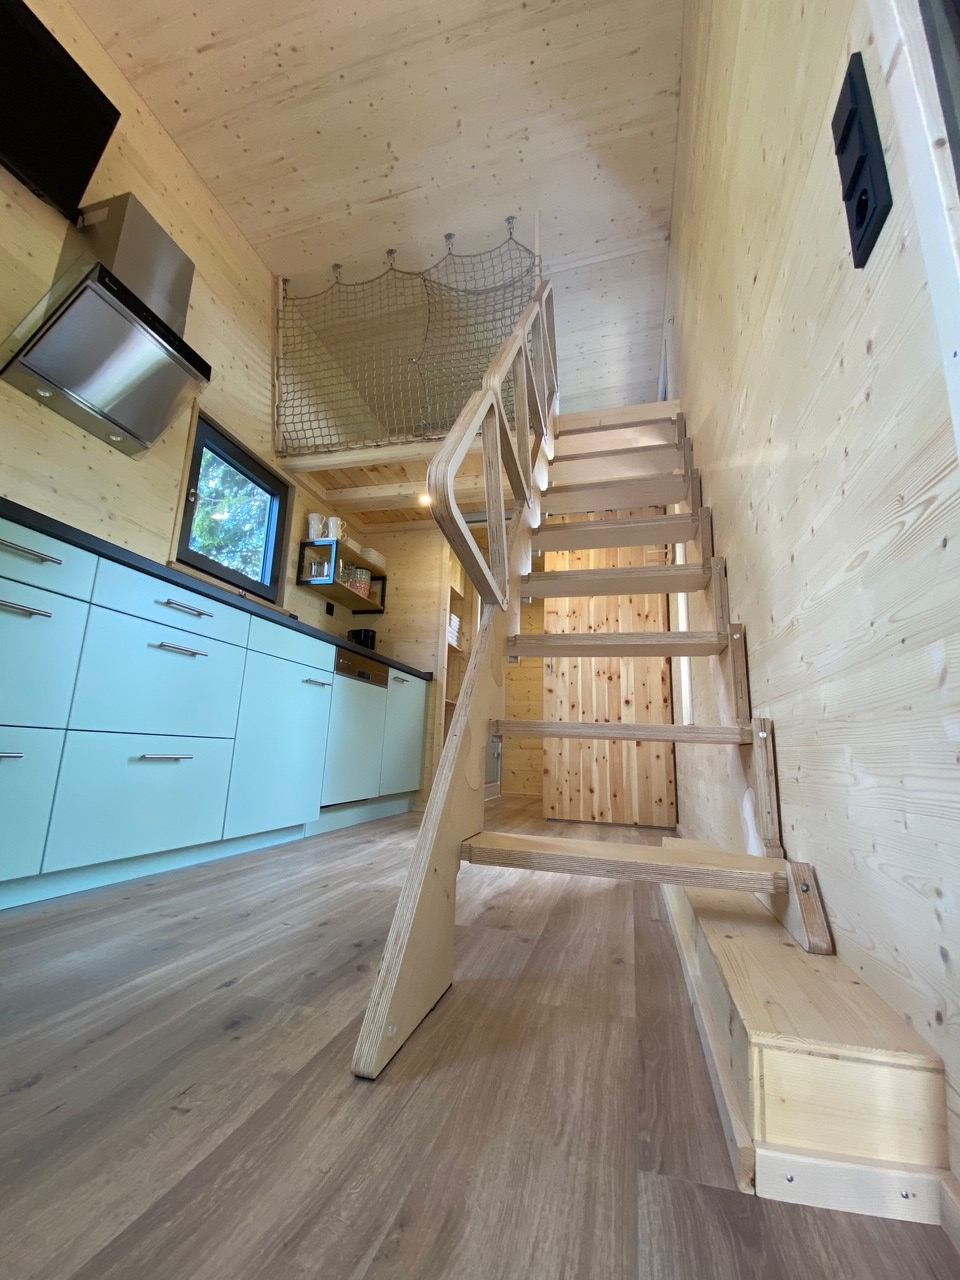 Klapster Folding Staircase for tiny homes or small apartments